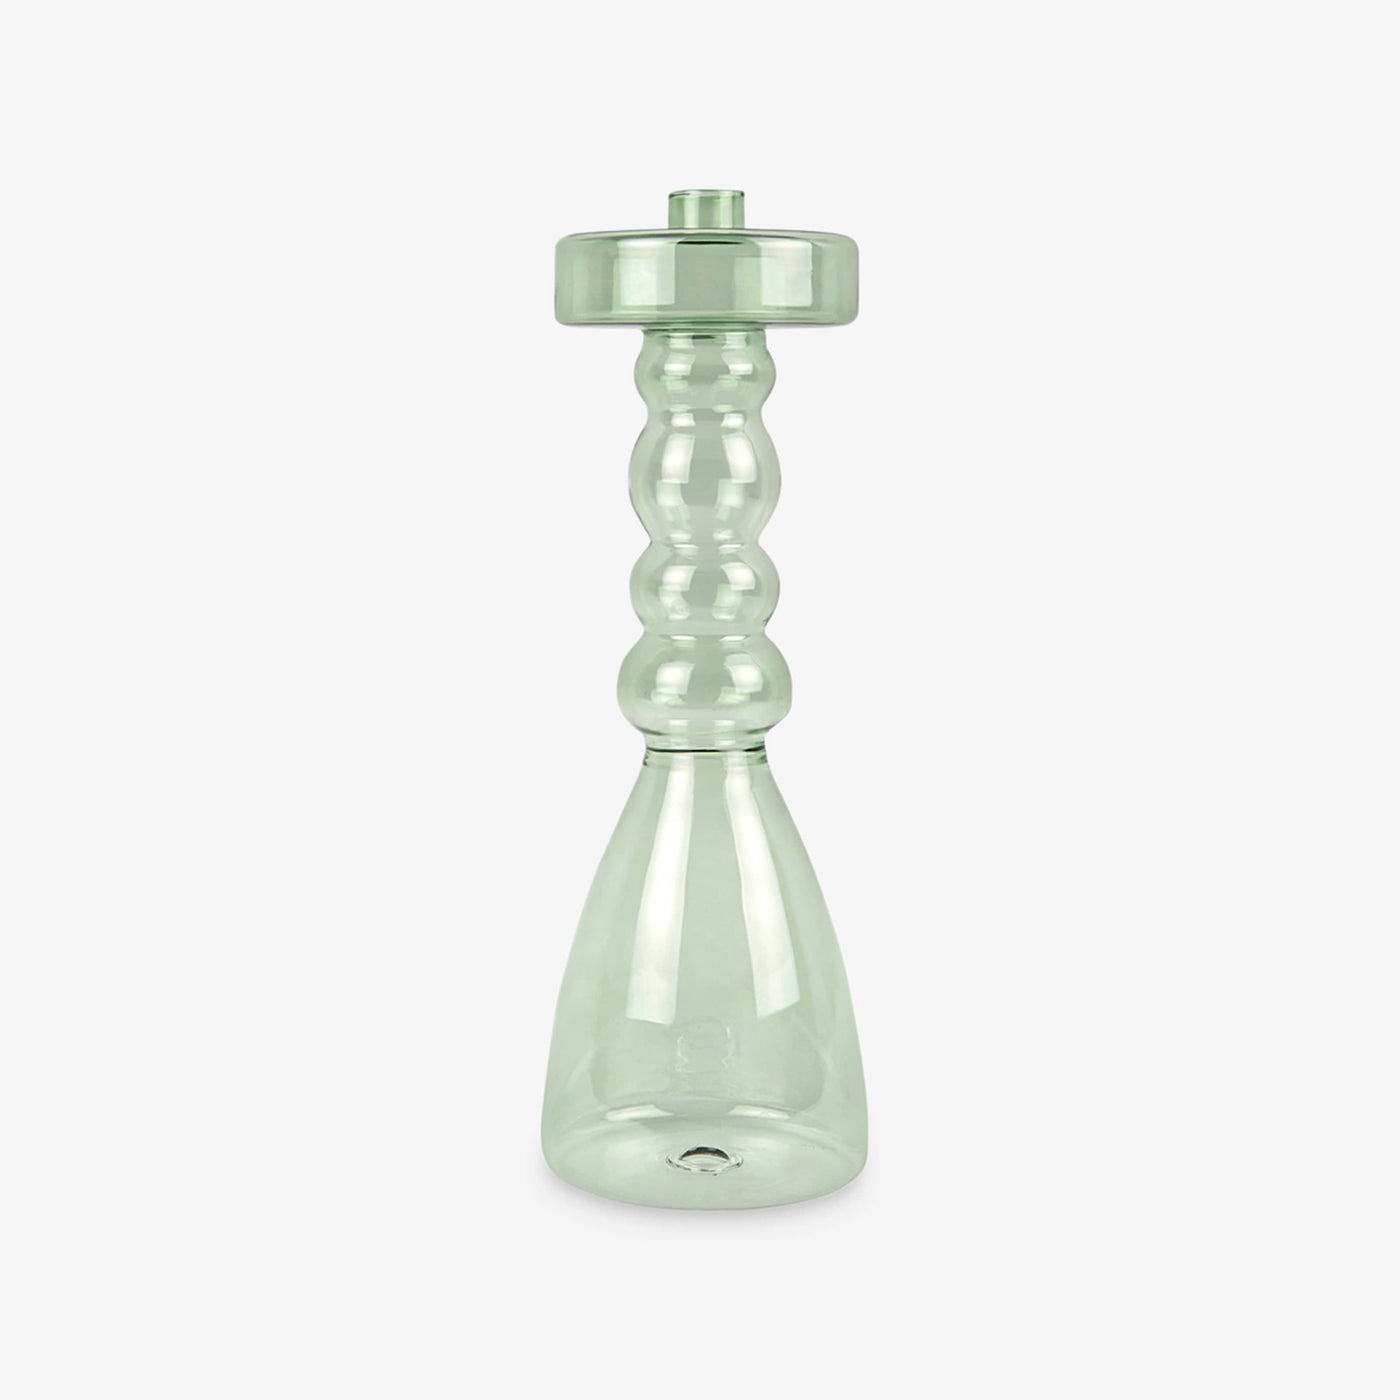 Ludou Candle Holder, Glass, Jungle Green, L Candle Holders sazy.com